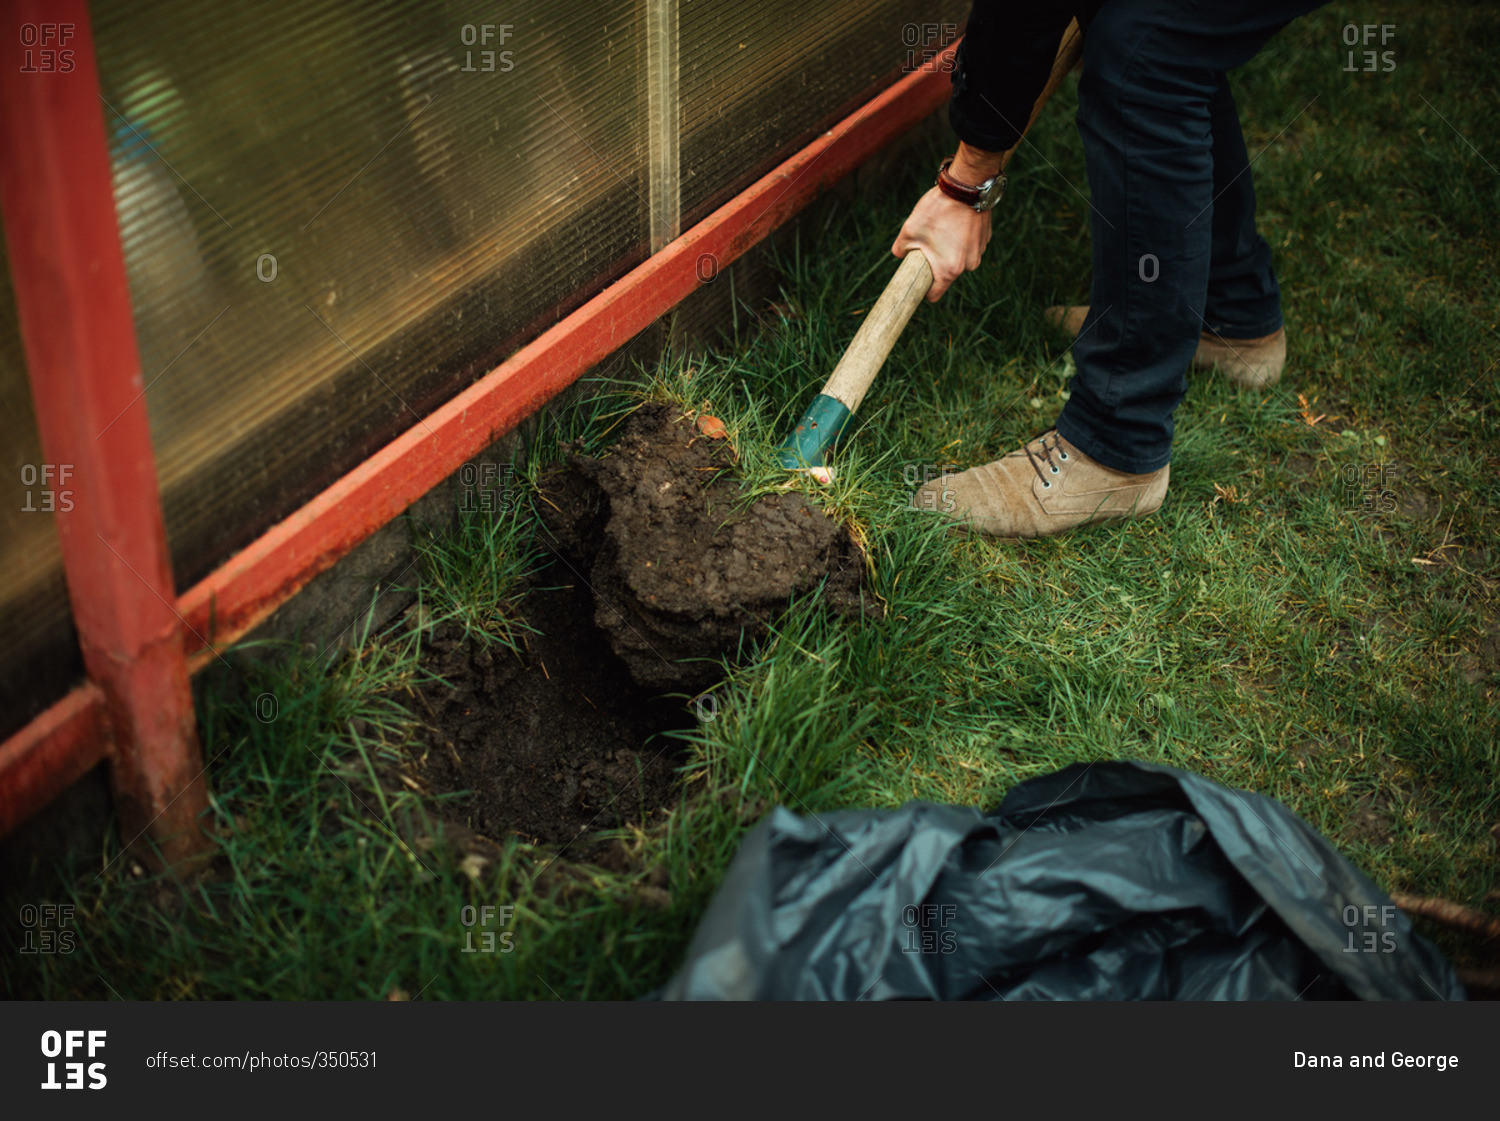 Person digging a hole to plant flower bulbs in the spring